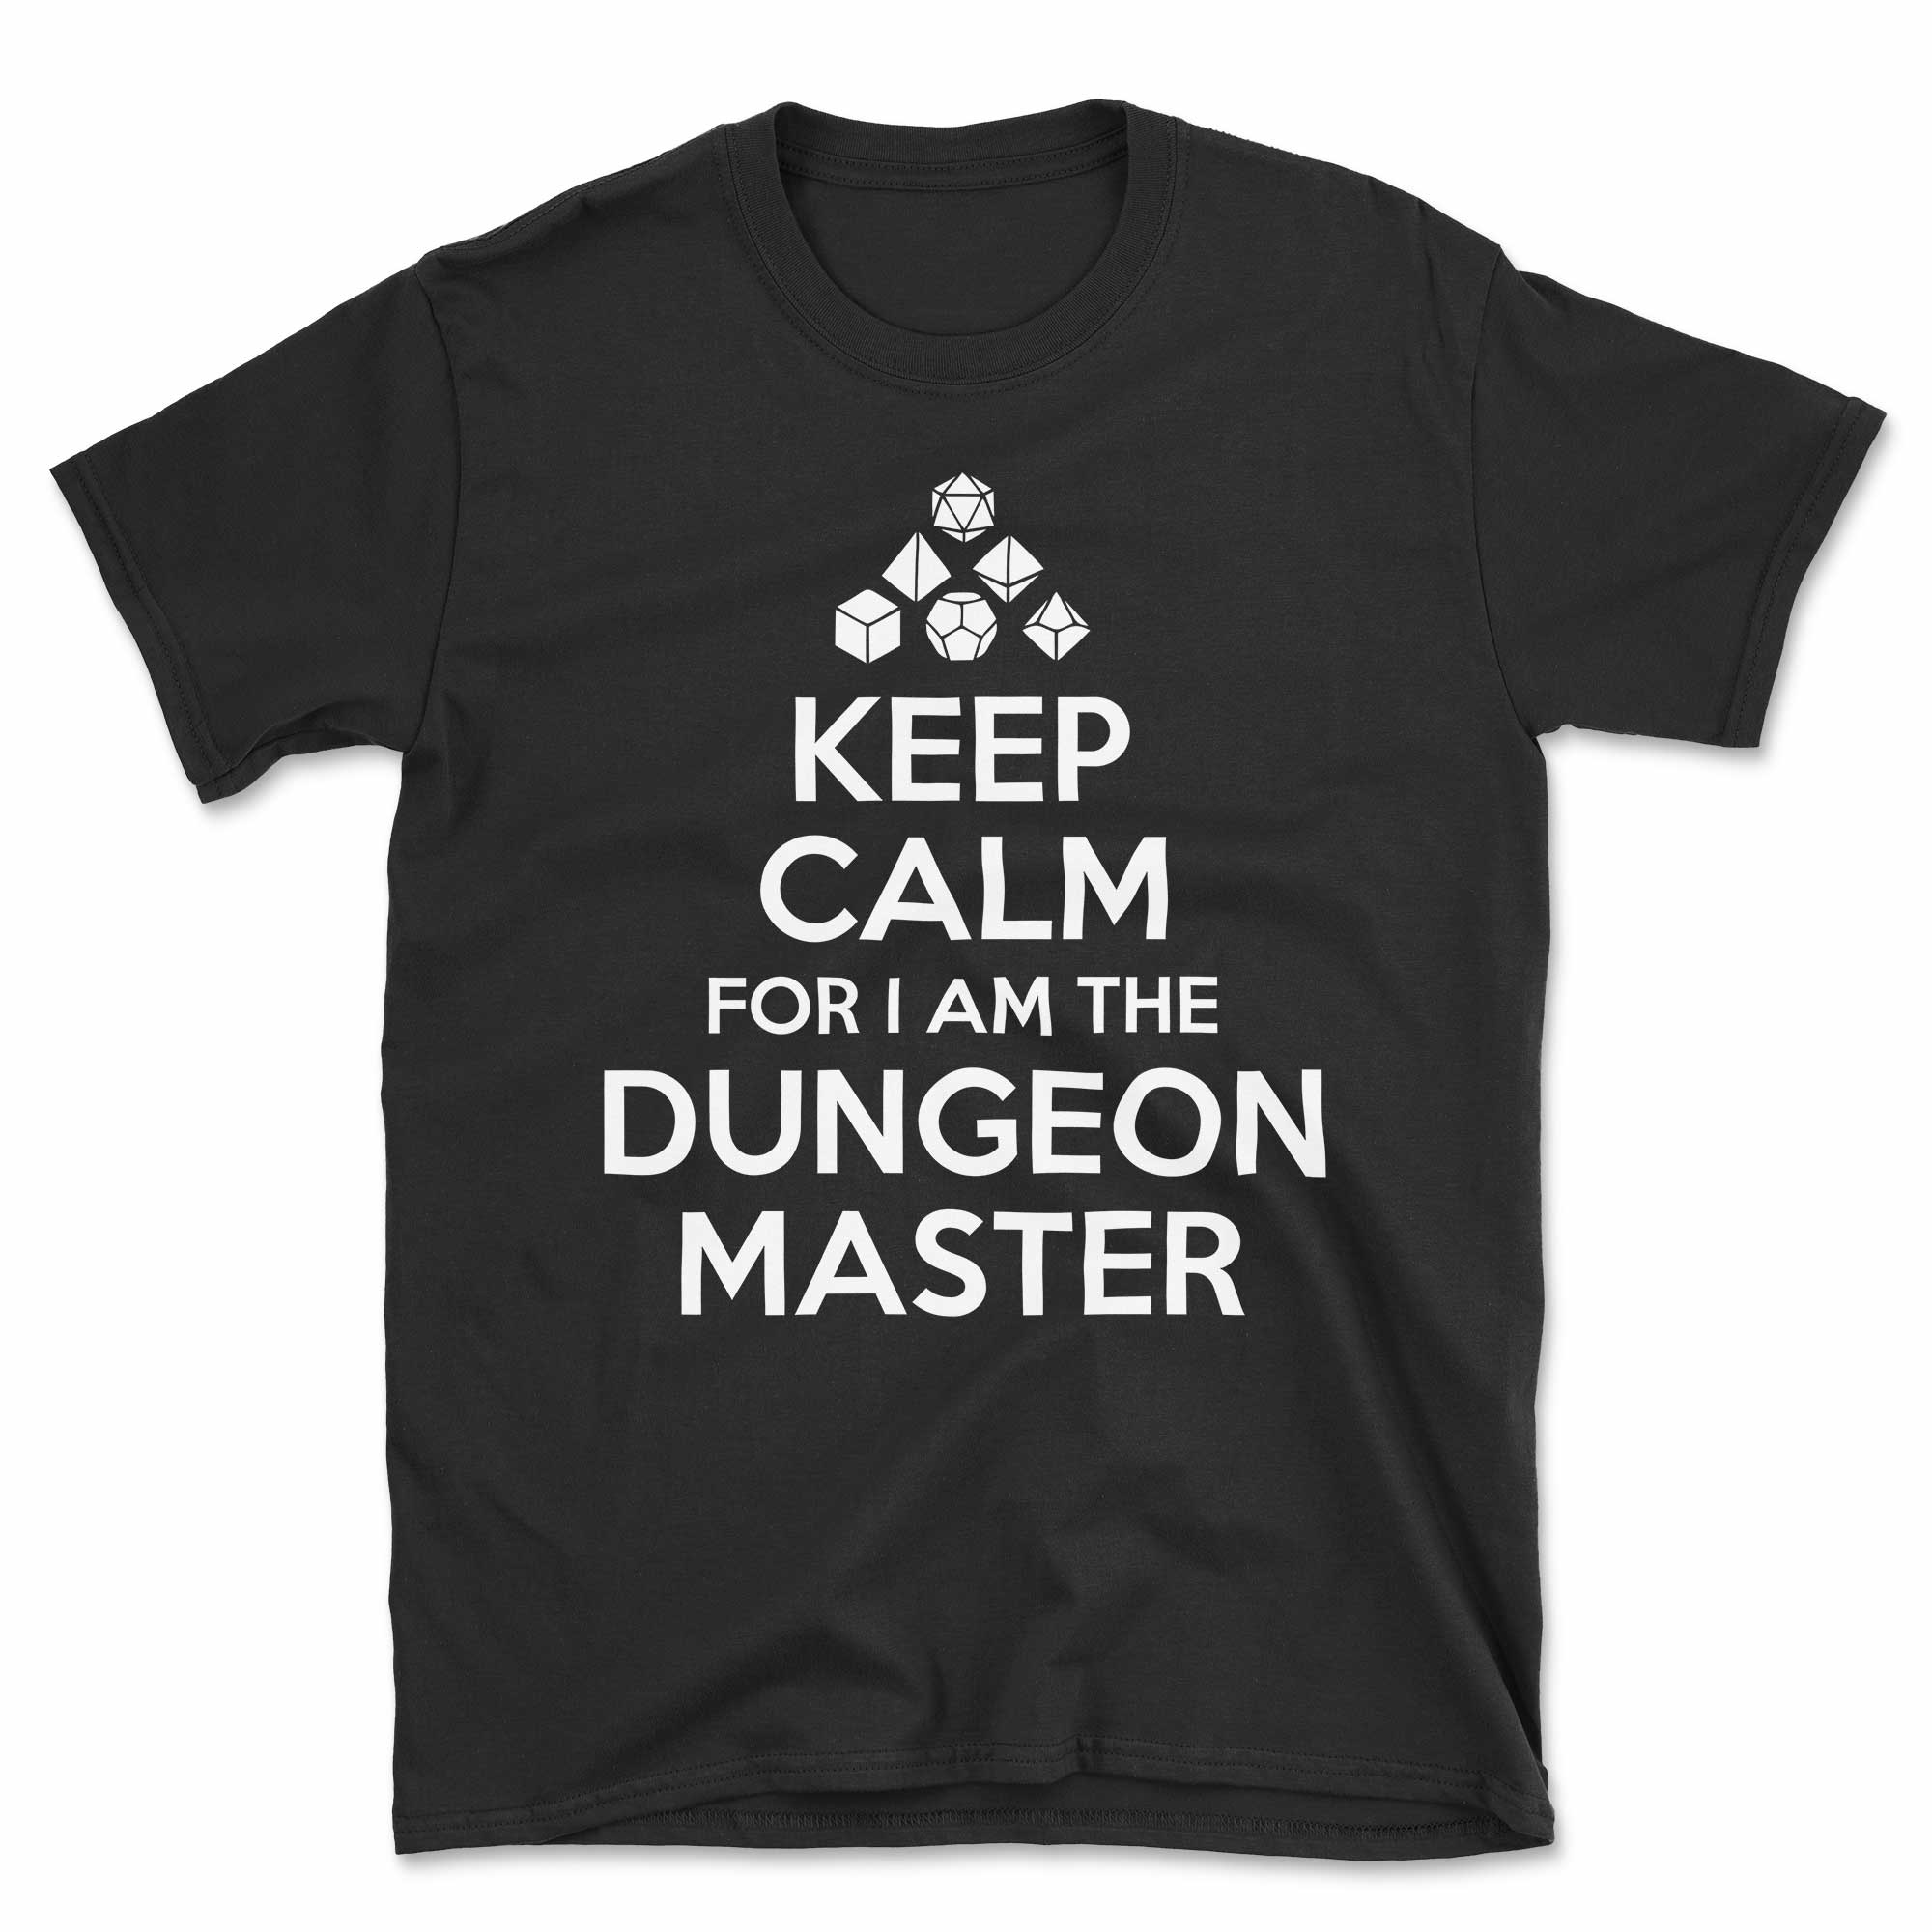 Keep Calm for I am the Dungeon Master T-Shirt